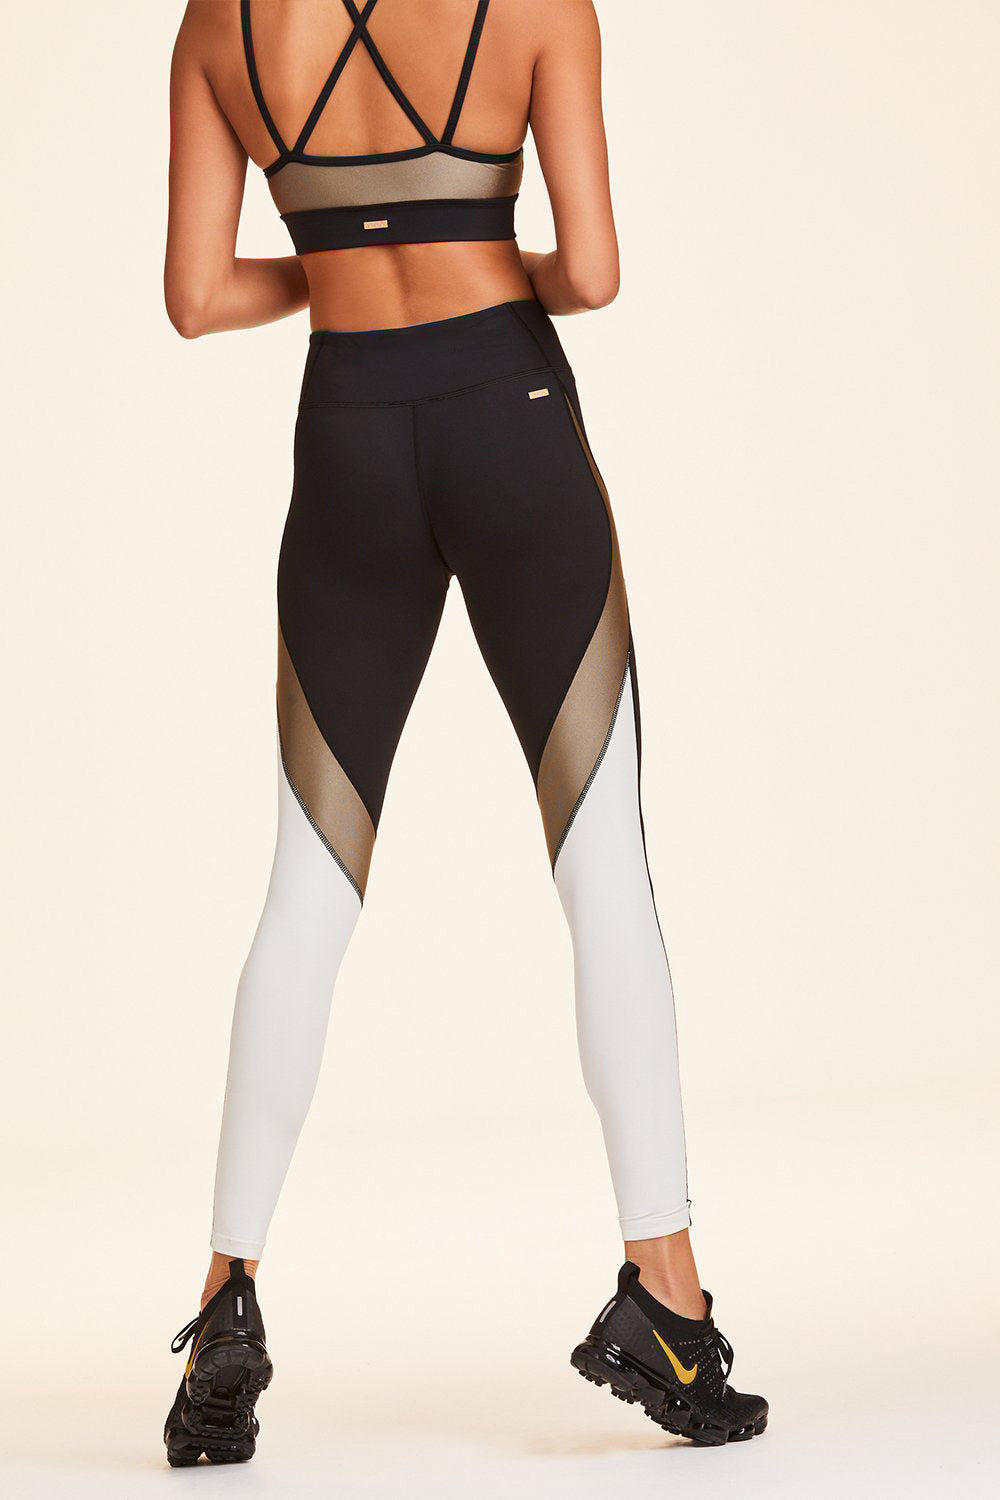 Back view of Alala Women's Luxury Athleisure black, white, and gold color-blocked tight